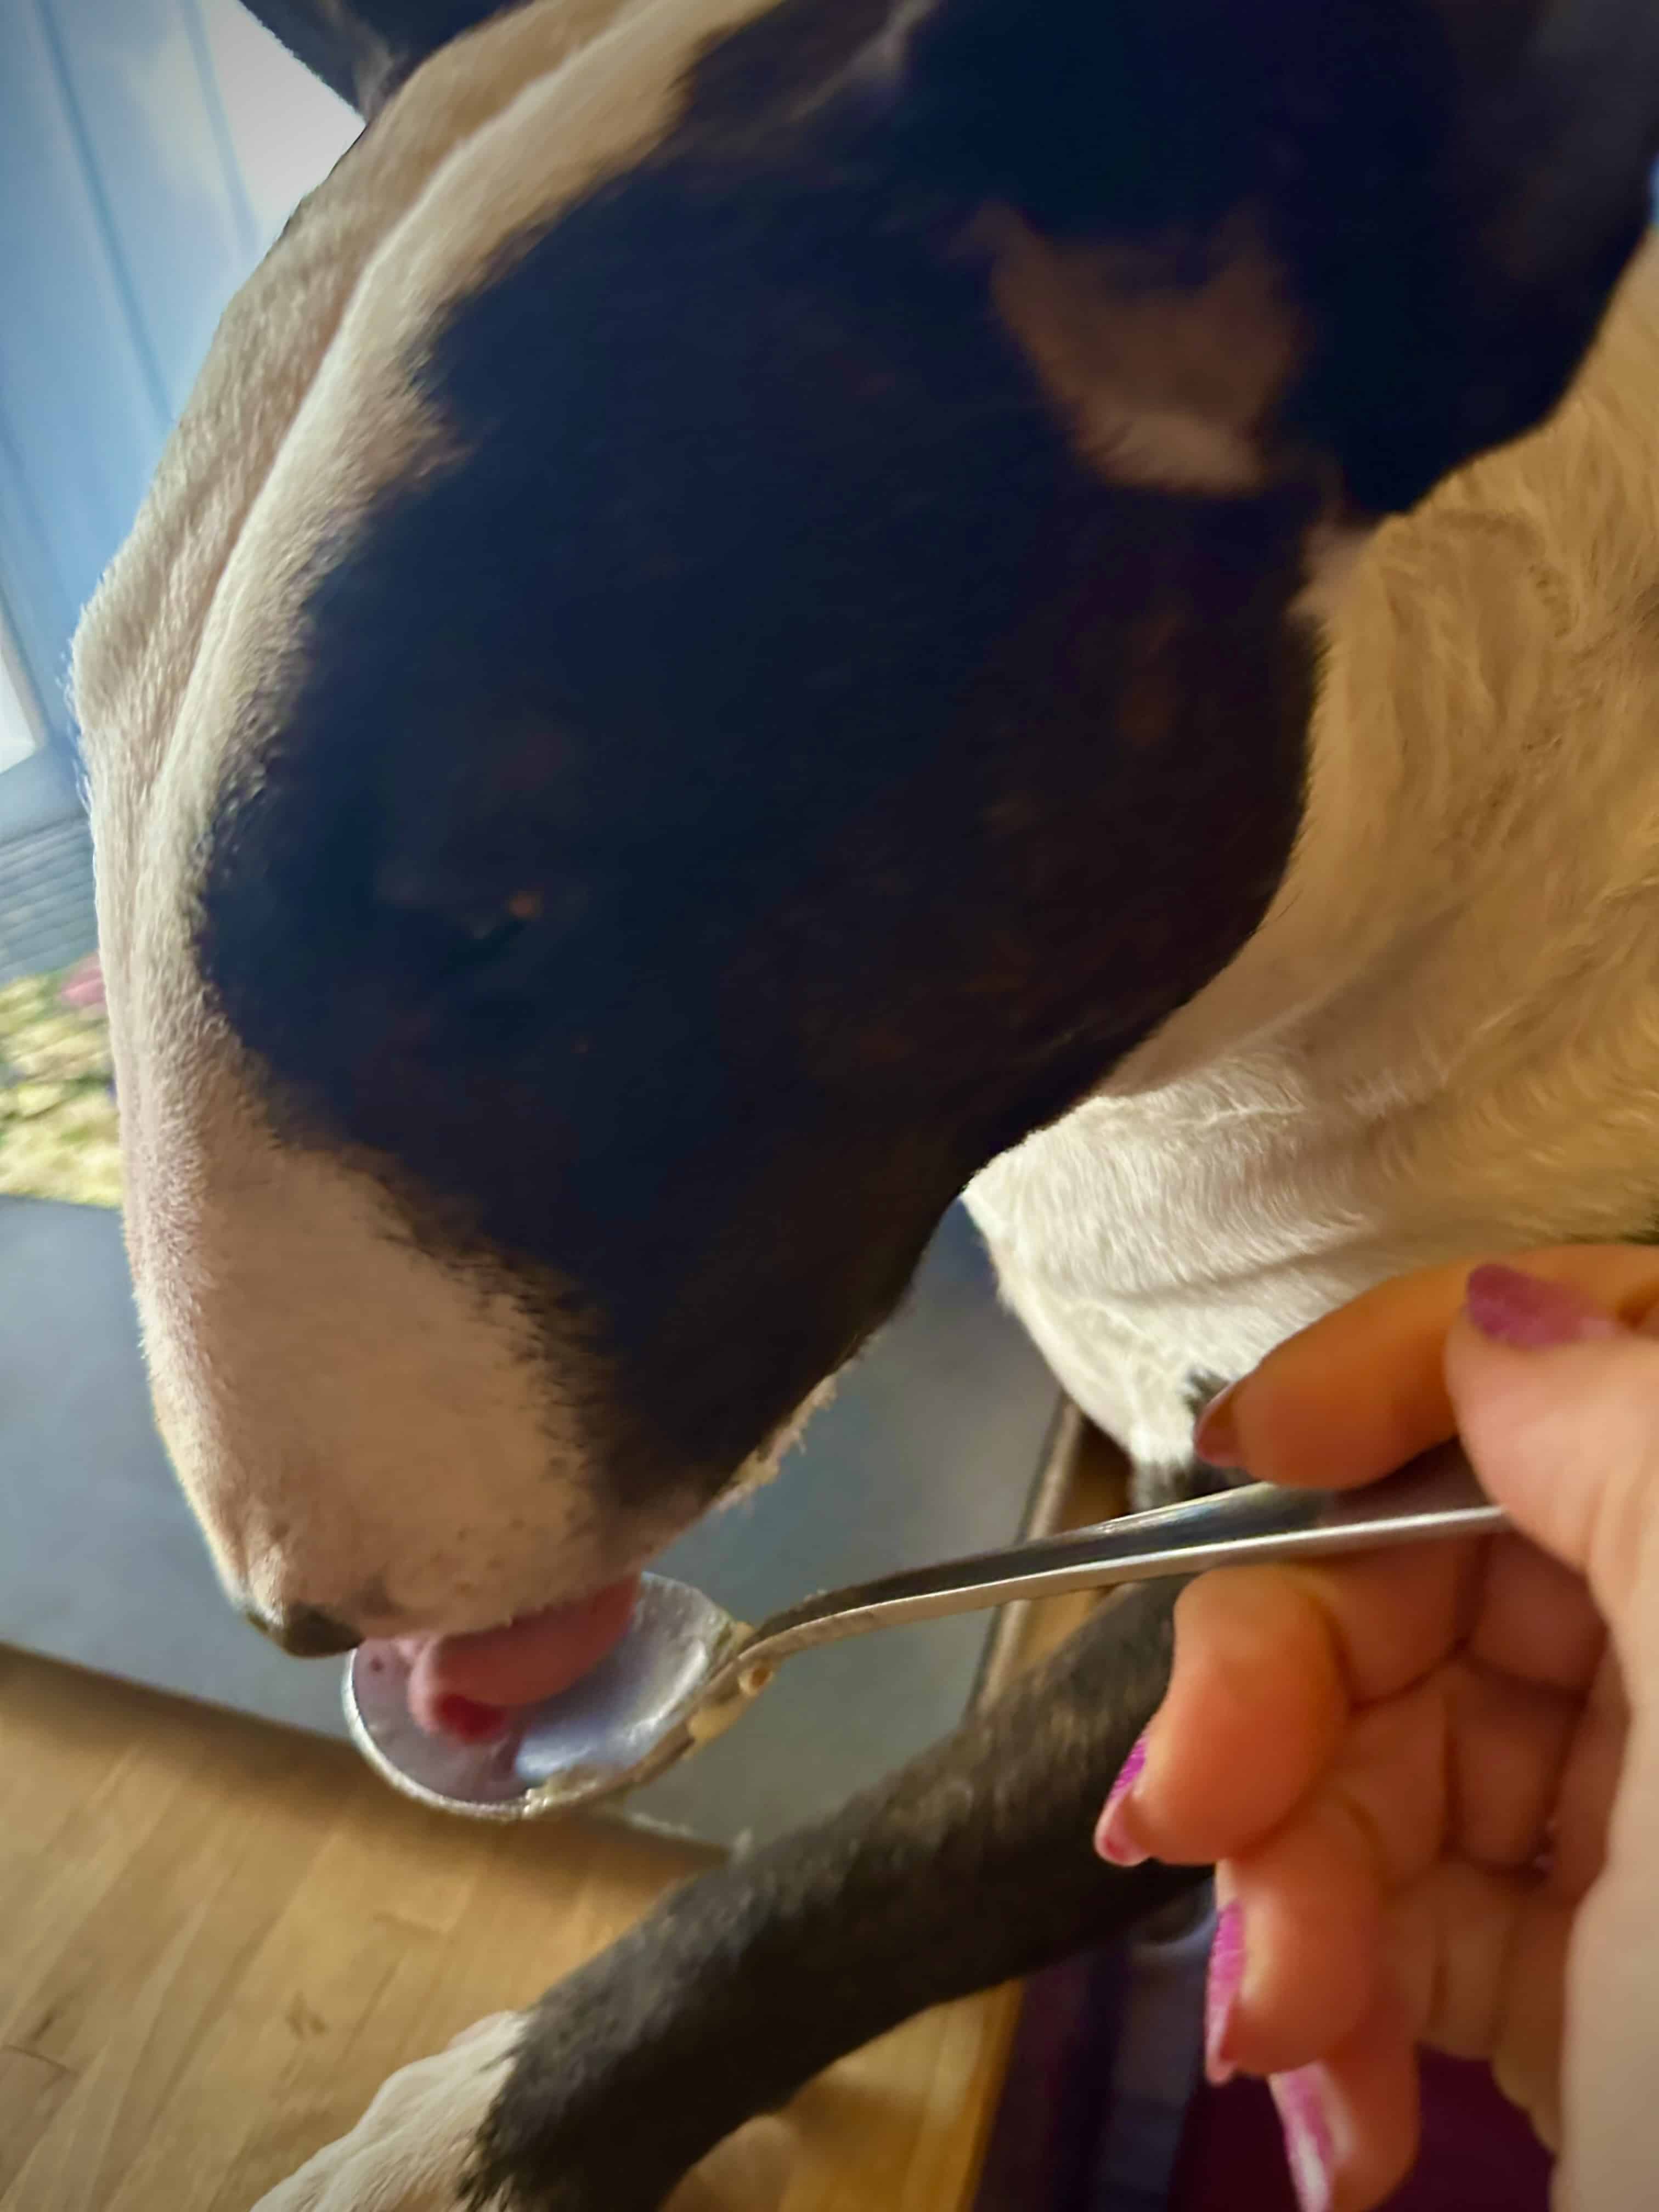 Nora licking spoon.